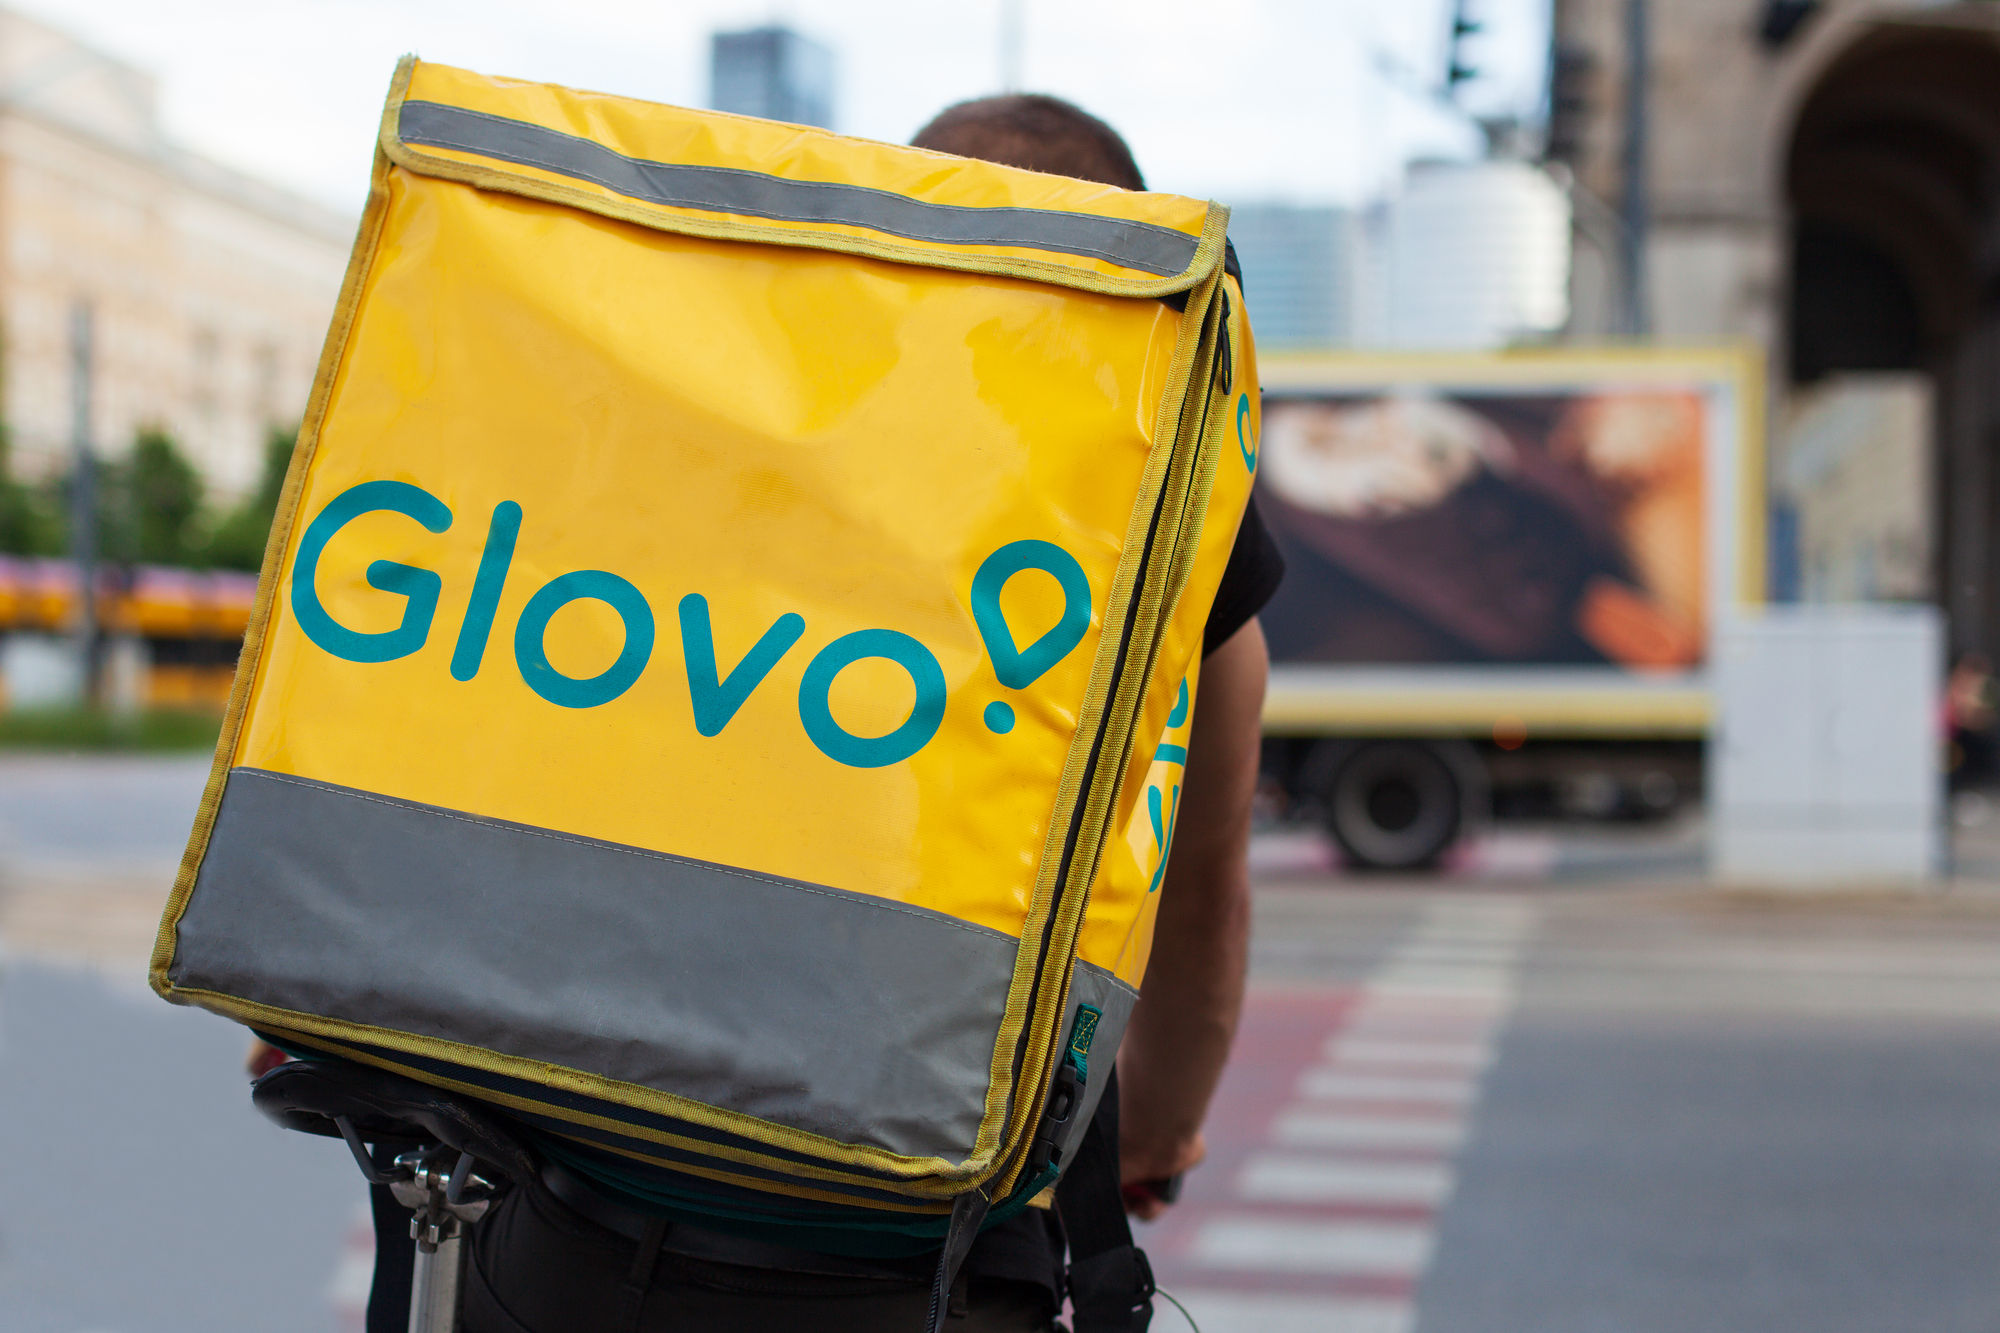 Warsaw, Poznan - Jun 05, 2021: Glovo cyclist on the street in the city center. Food delivery. Close up of a bag.